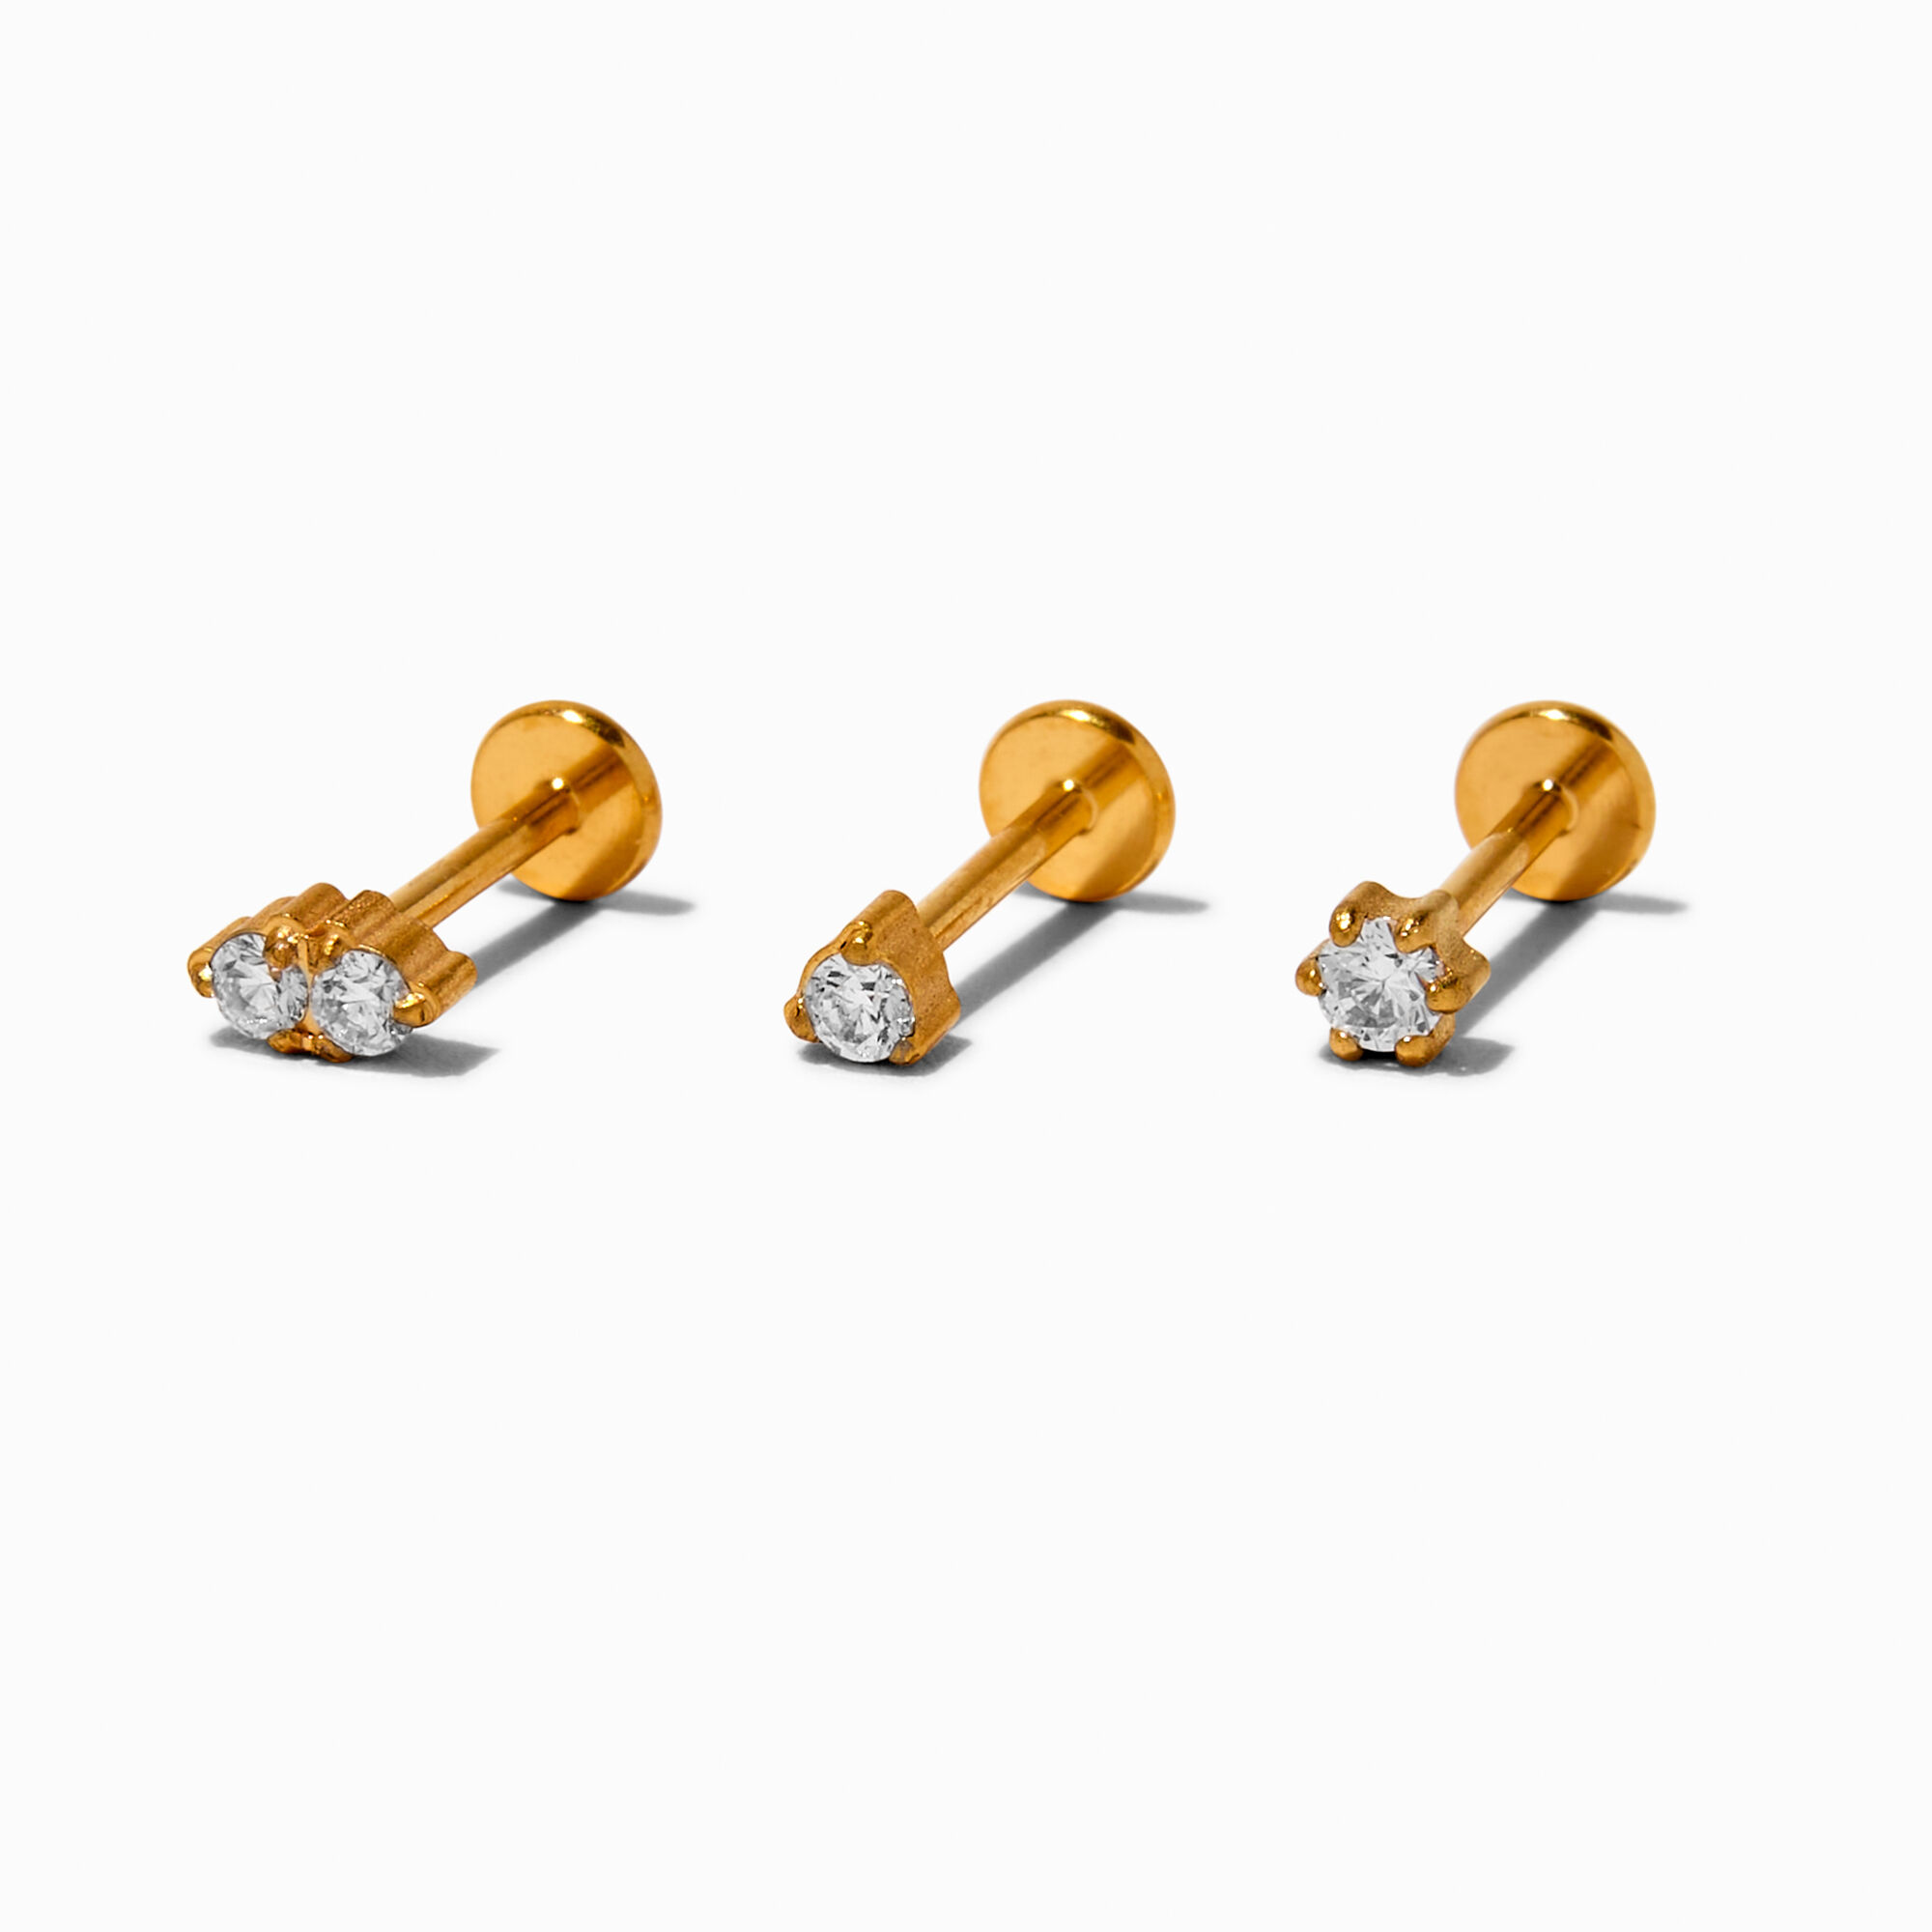 View Claires Tone Titanium Crystal 18G Threadless Tragus Earring 3 Pack Gold information